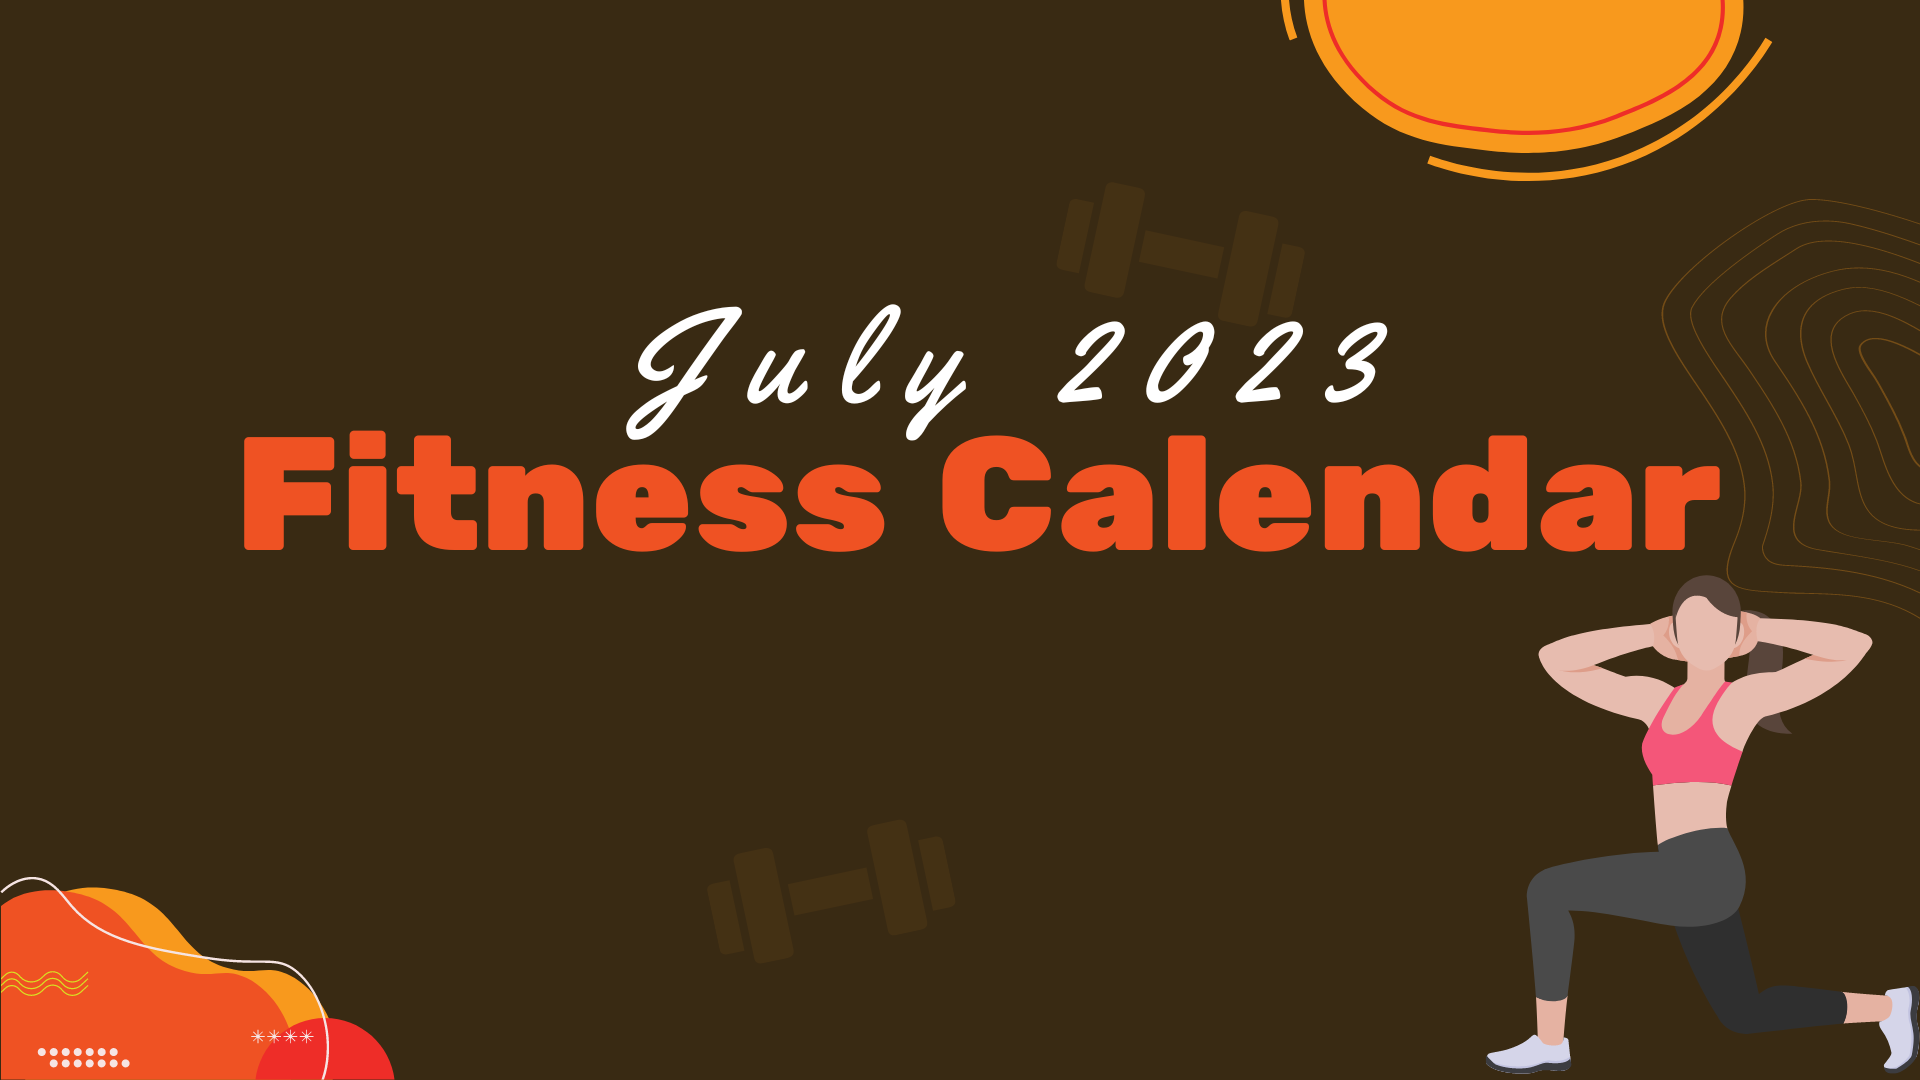 Clipart image of July 2023 Fitness Calendar for Madeira Beach Recreation